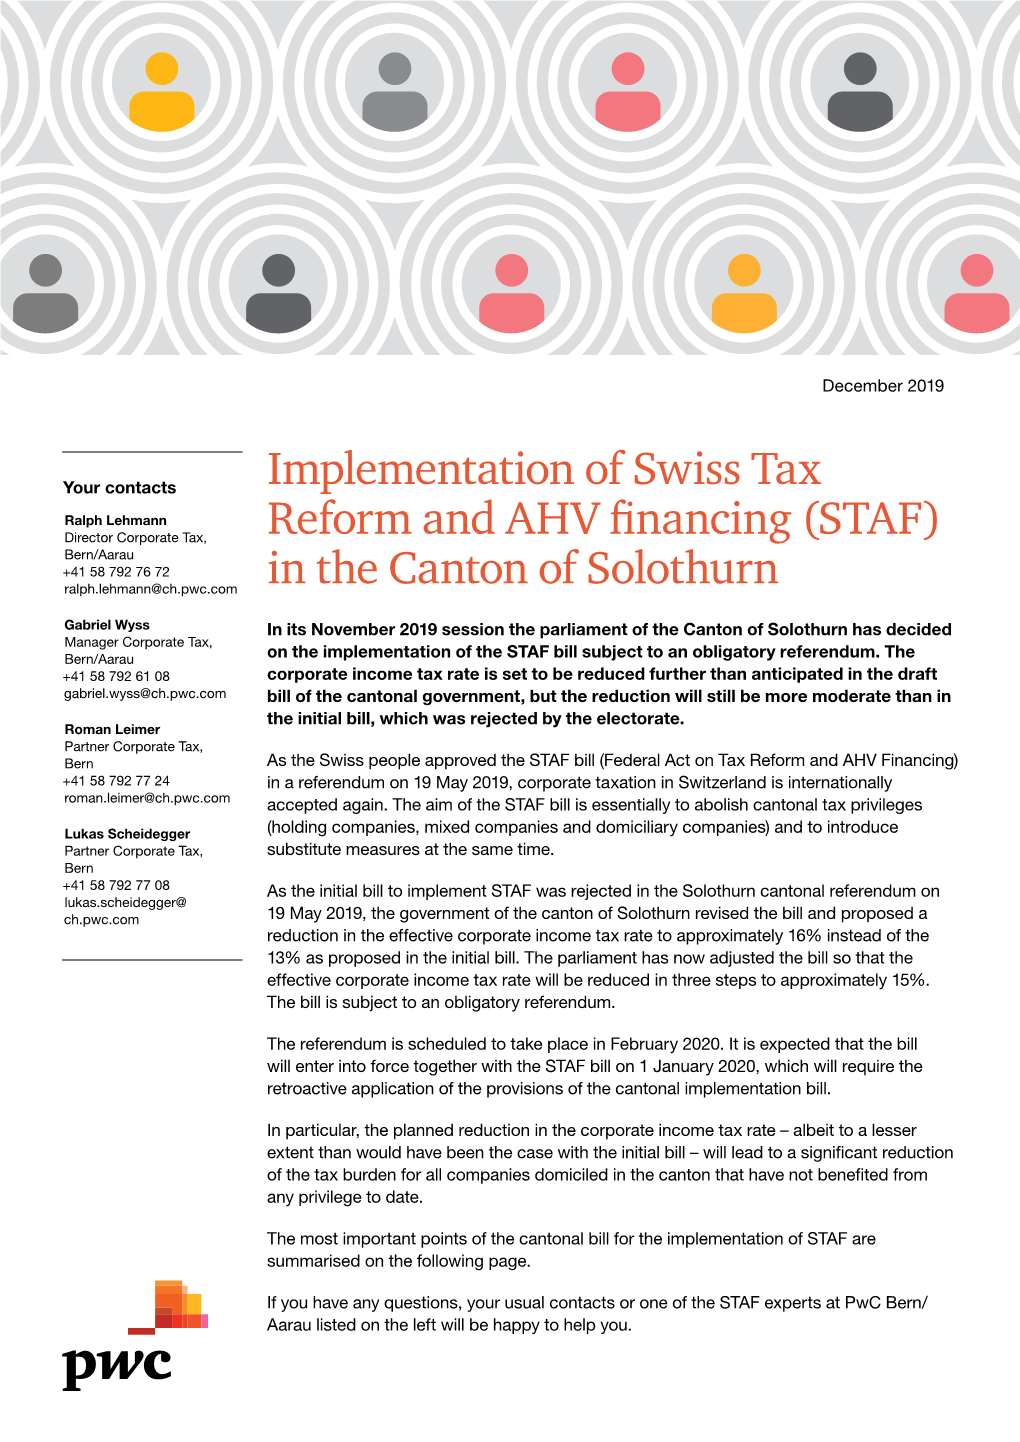 Implementation of Swiss Tax Reform and AHV Financing (STAF) in The